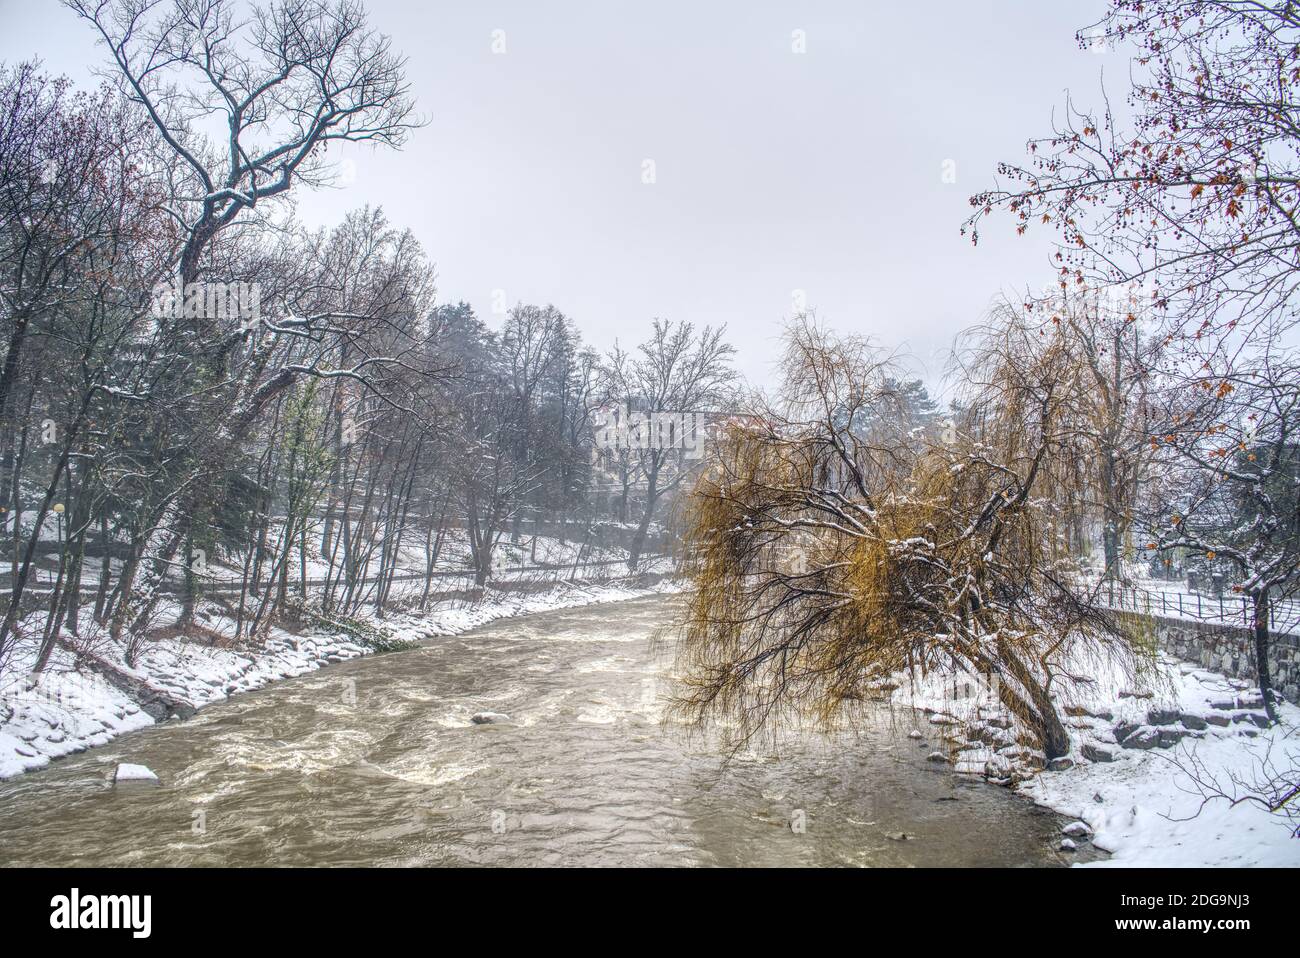 Passer river's dirty water after a heavy snowfall and its promenade on the sides in Merano, Italy covered by wet snow. Stock Photo